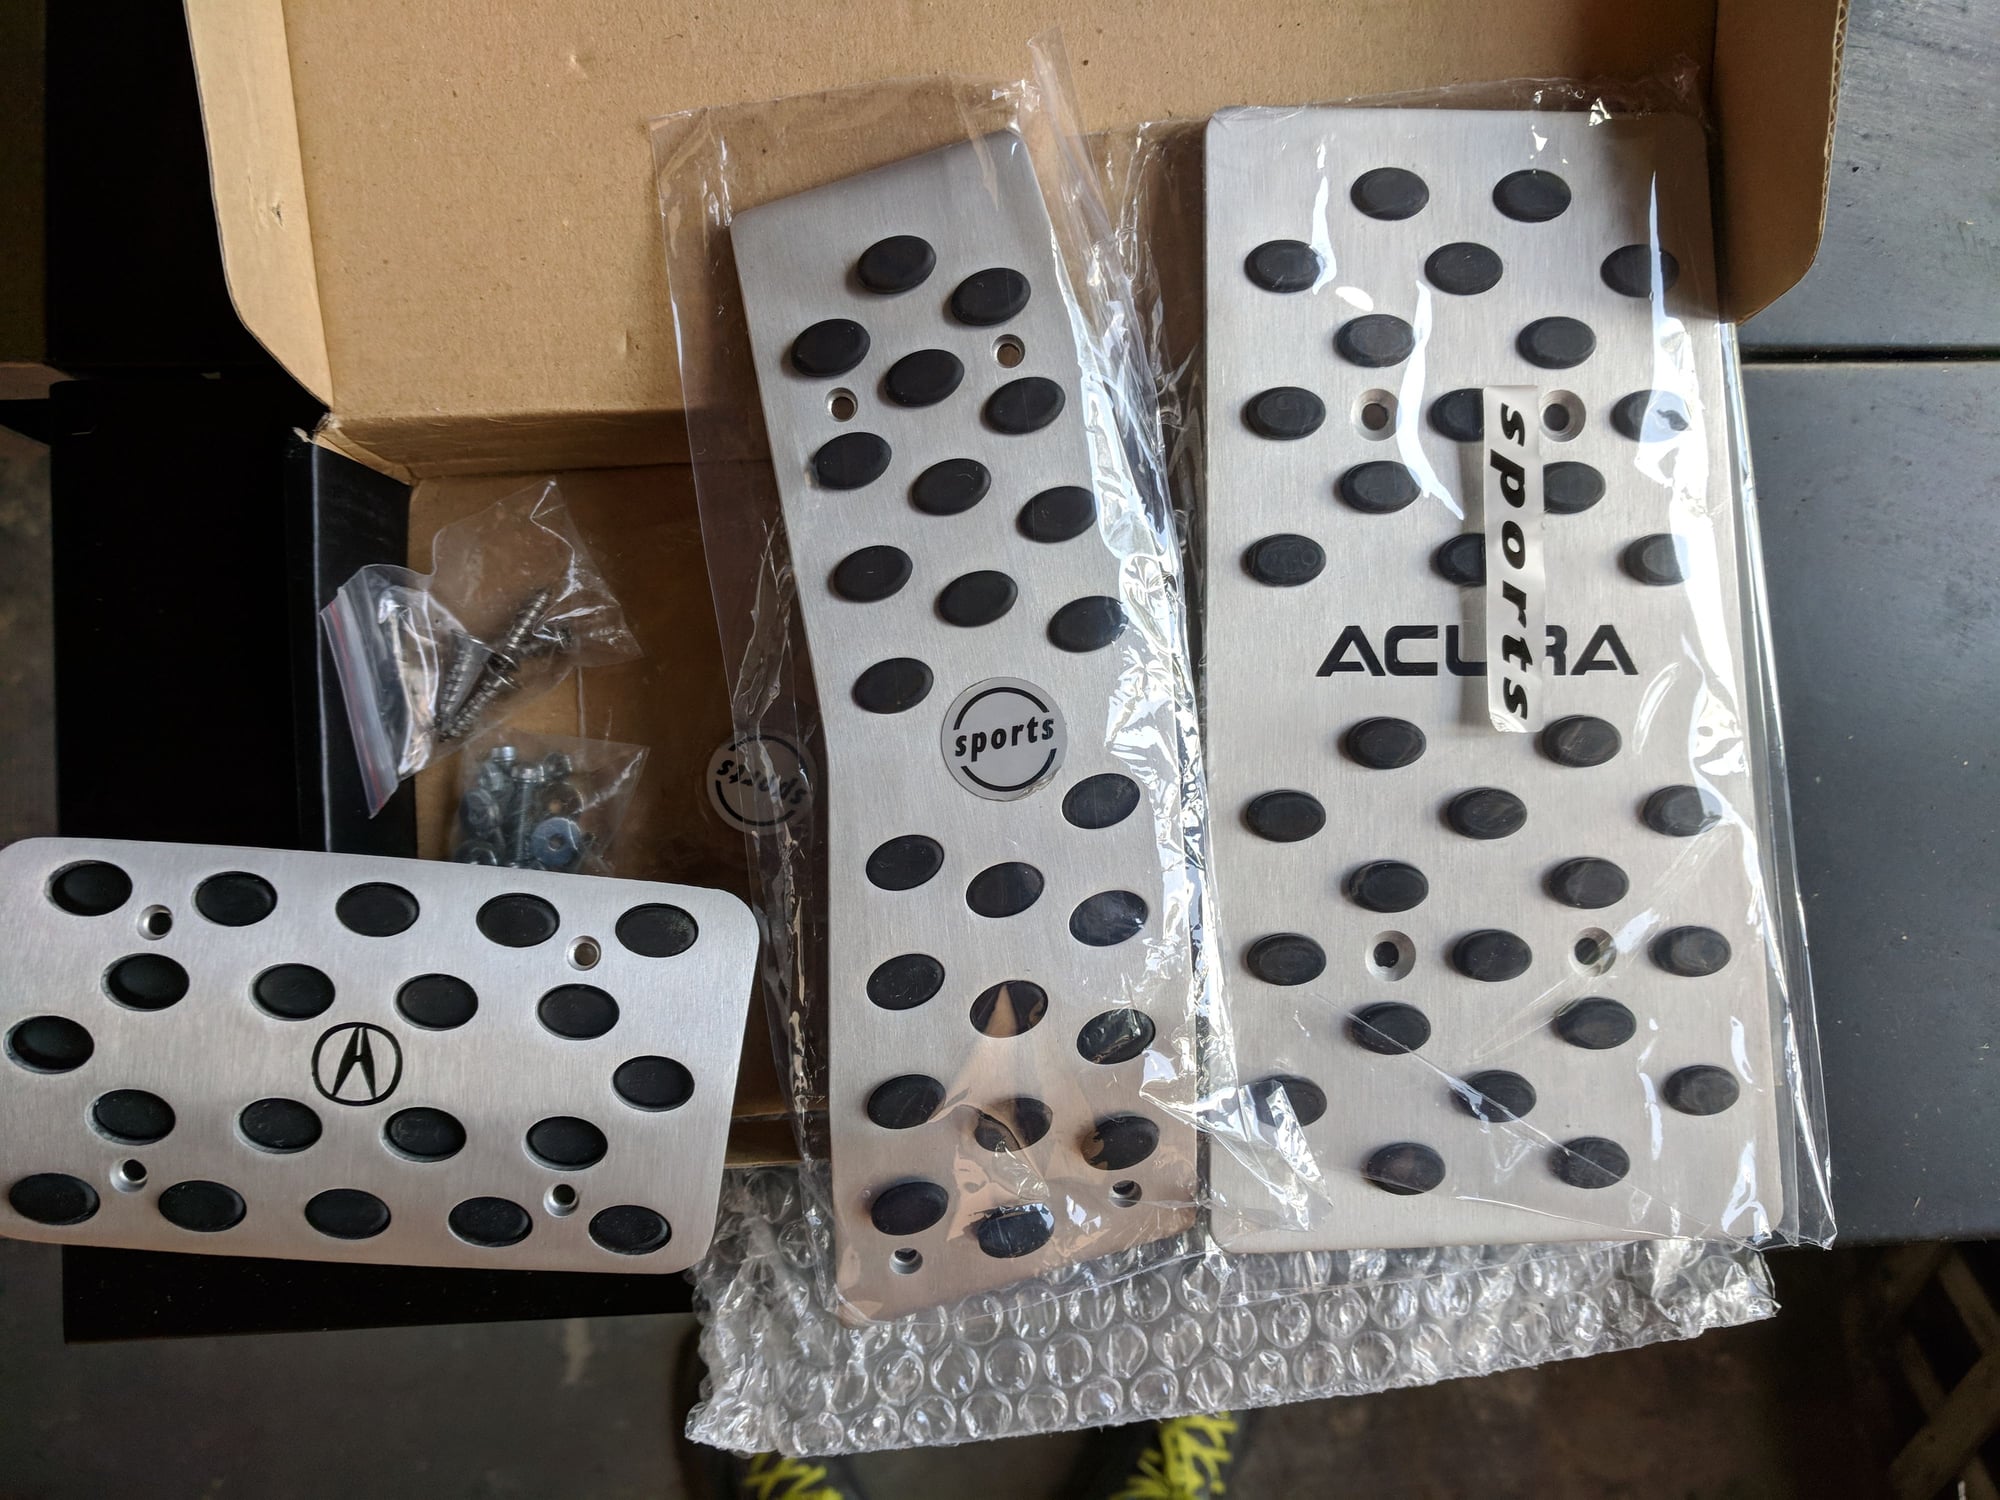 Miscellaneous - SOLD: ORIGINAL Supercomputer Acura Pedals for 3g TL - New - 2004 to 2008 Acura TL - Pembroke Pines, FL 33026, United States